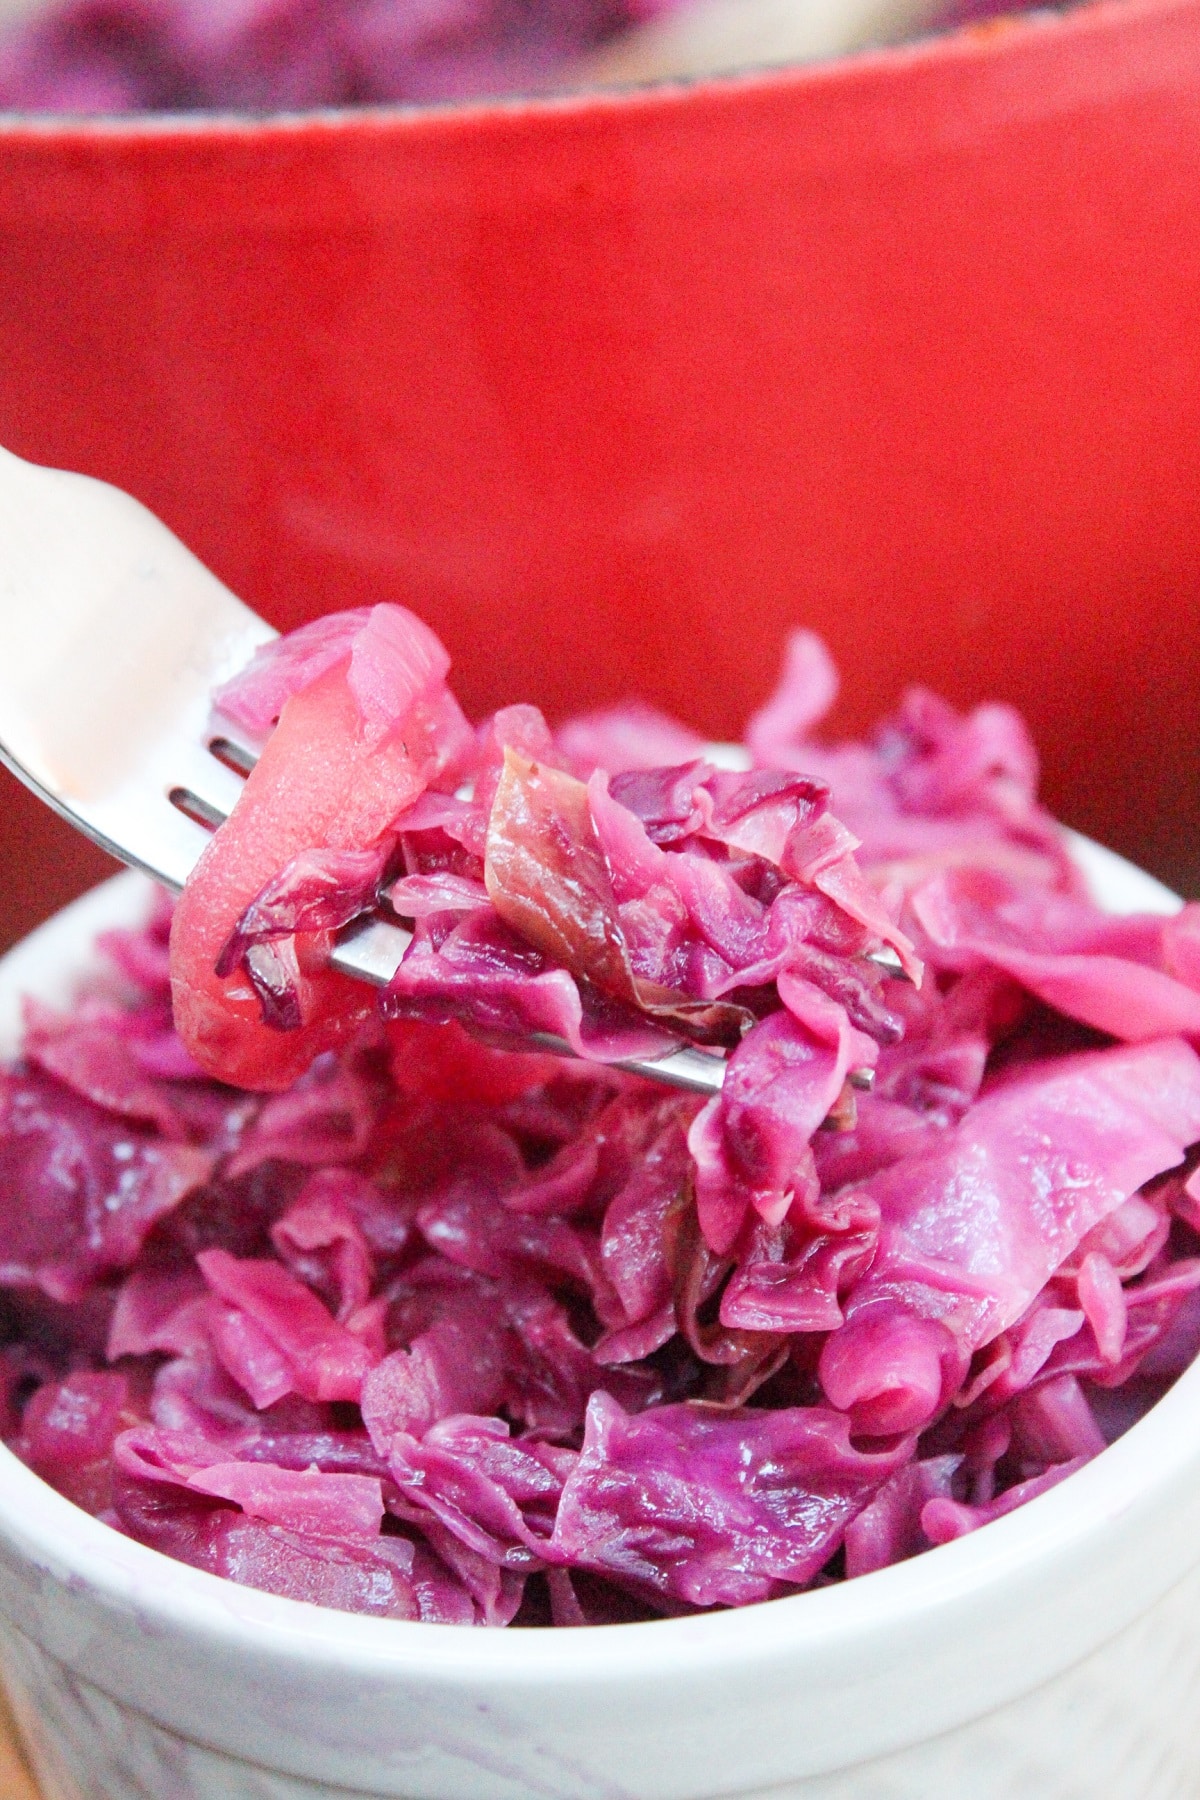 chopped red cabbage and apples in a small white dish with a fork.